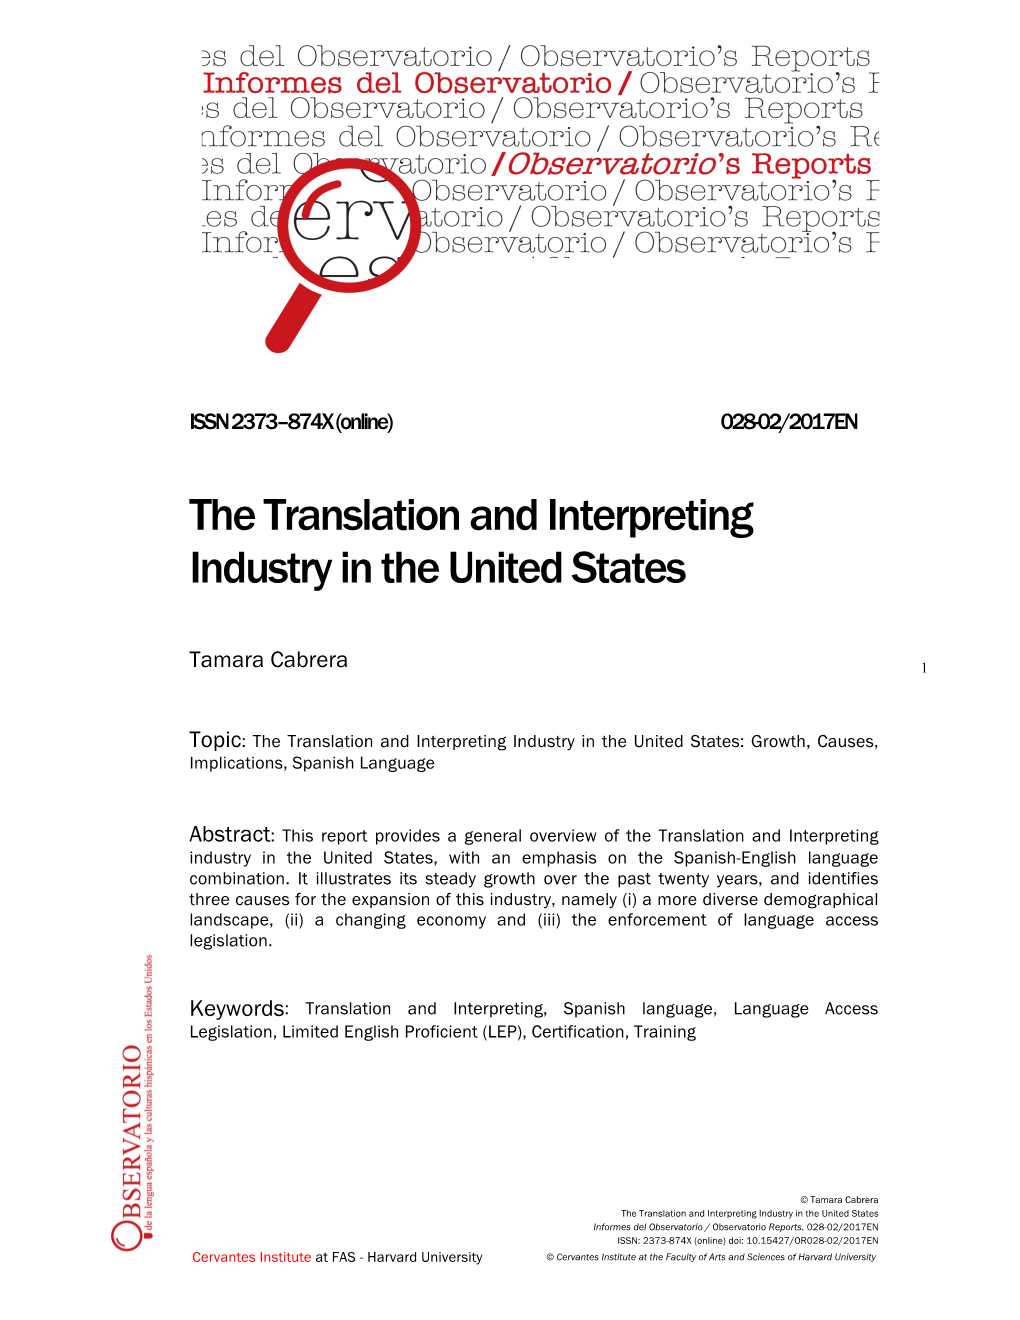 The Translation and Interpreting Industry in the United States